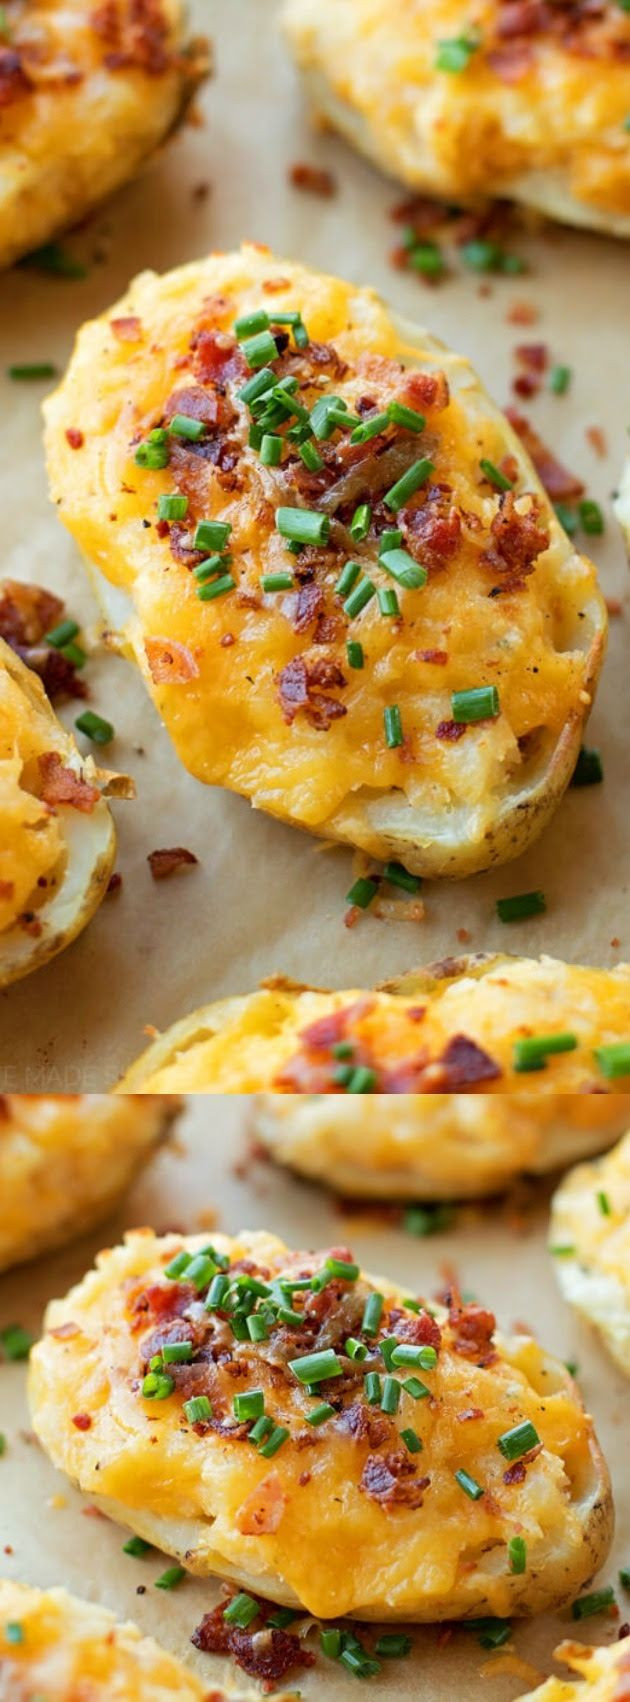 Side Dishes For Baked Potatoes
 Loaded Potato Recipes that make the PERFECT Dinner Side